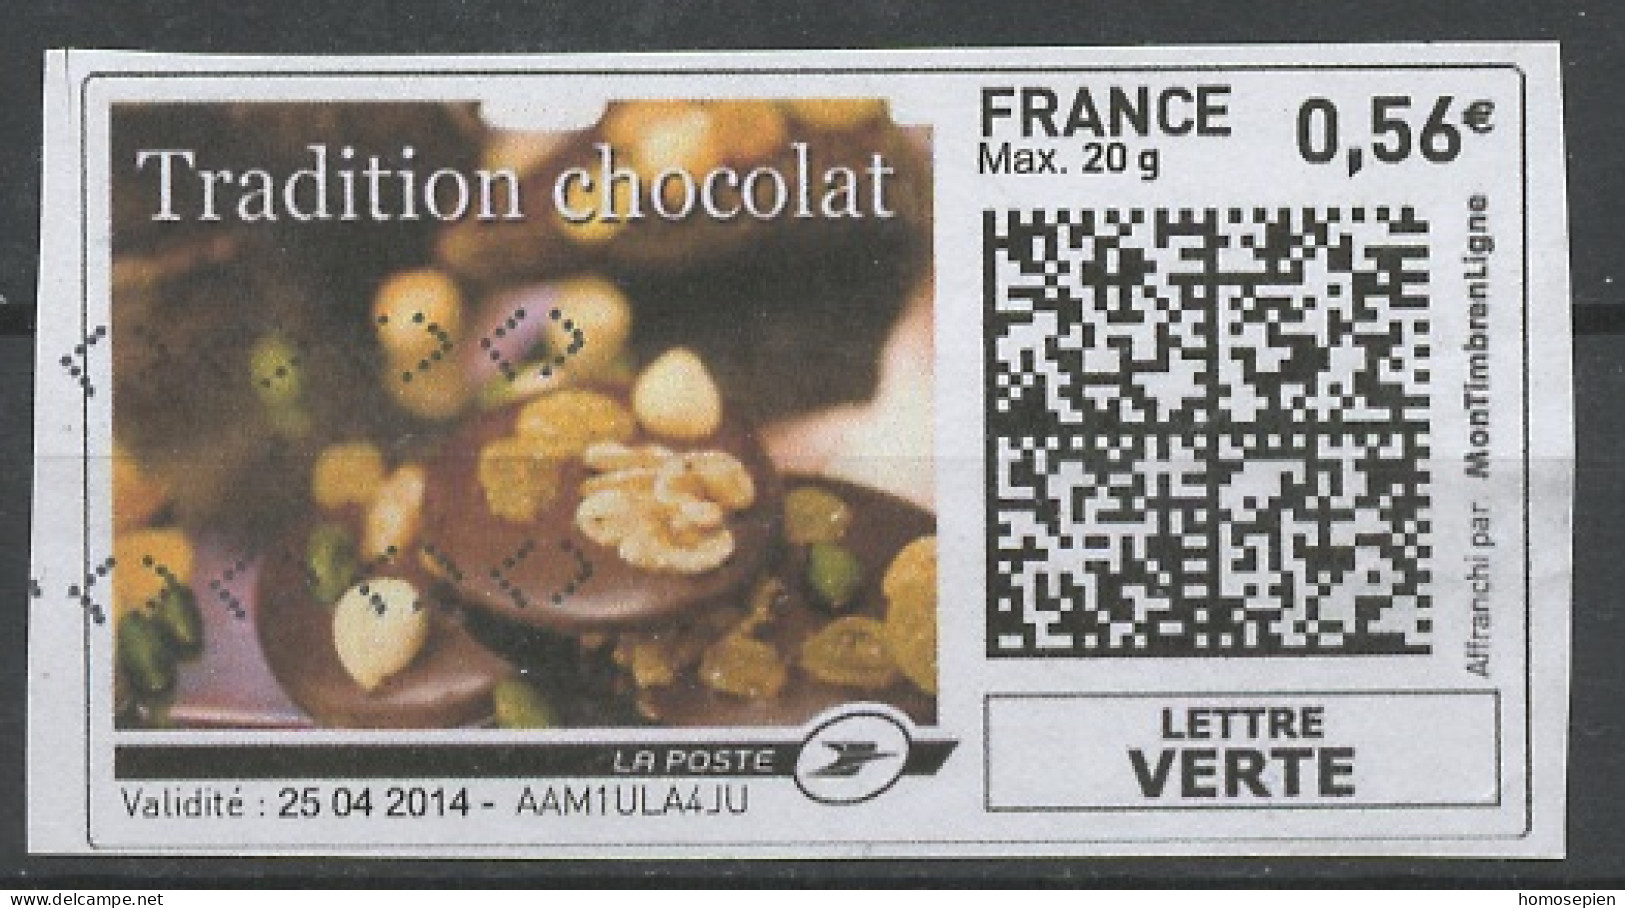 France - Frankreich Timbre Personnalisé Y&T N°MTEL LV20-03-0,56€  - Michel N°BS(?) (o) - Tradition Chocolat - Sellos Imprimibles (Montimbrenligne)